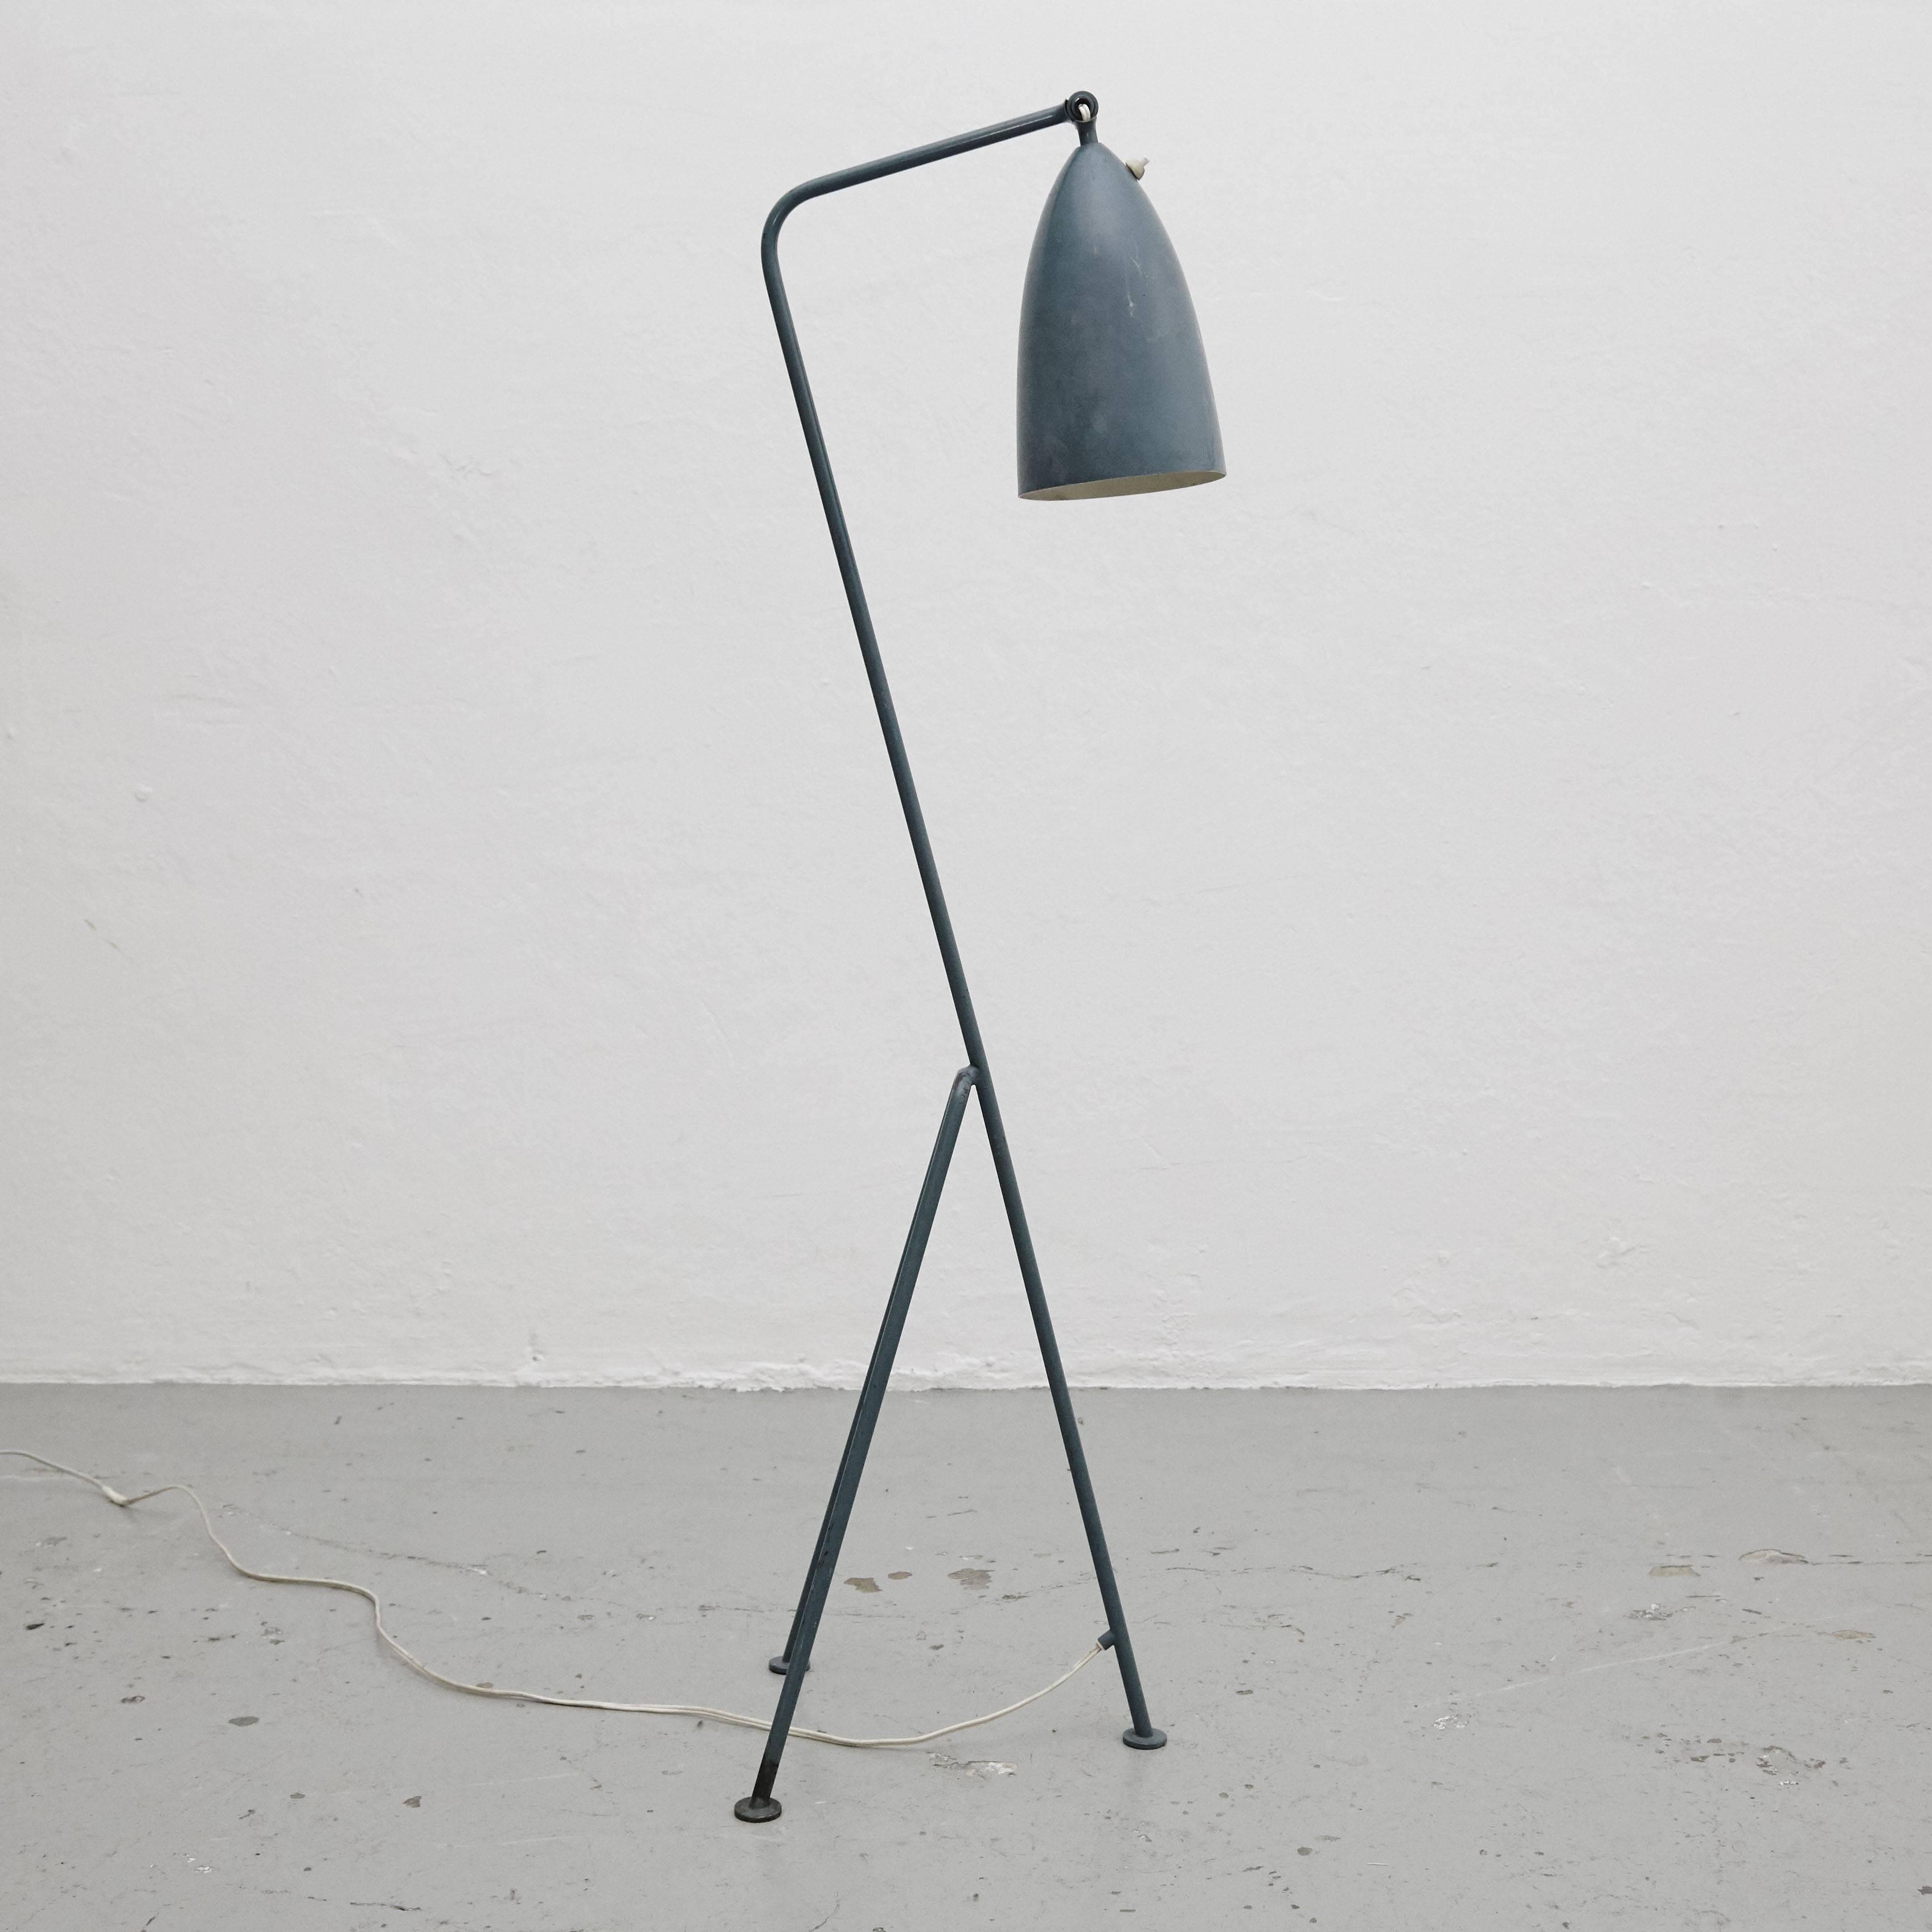 Floor lamp designed by Greta Magnusson Grossman in Sweden, circa 1947.

In original condition, with minor wear consistent with age and use, preserving a beautiful patina.

Greta Magnusson-Grossman (July 21, 1906 – August 1999) was a Swedish